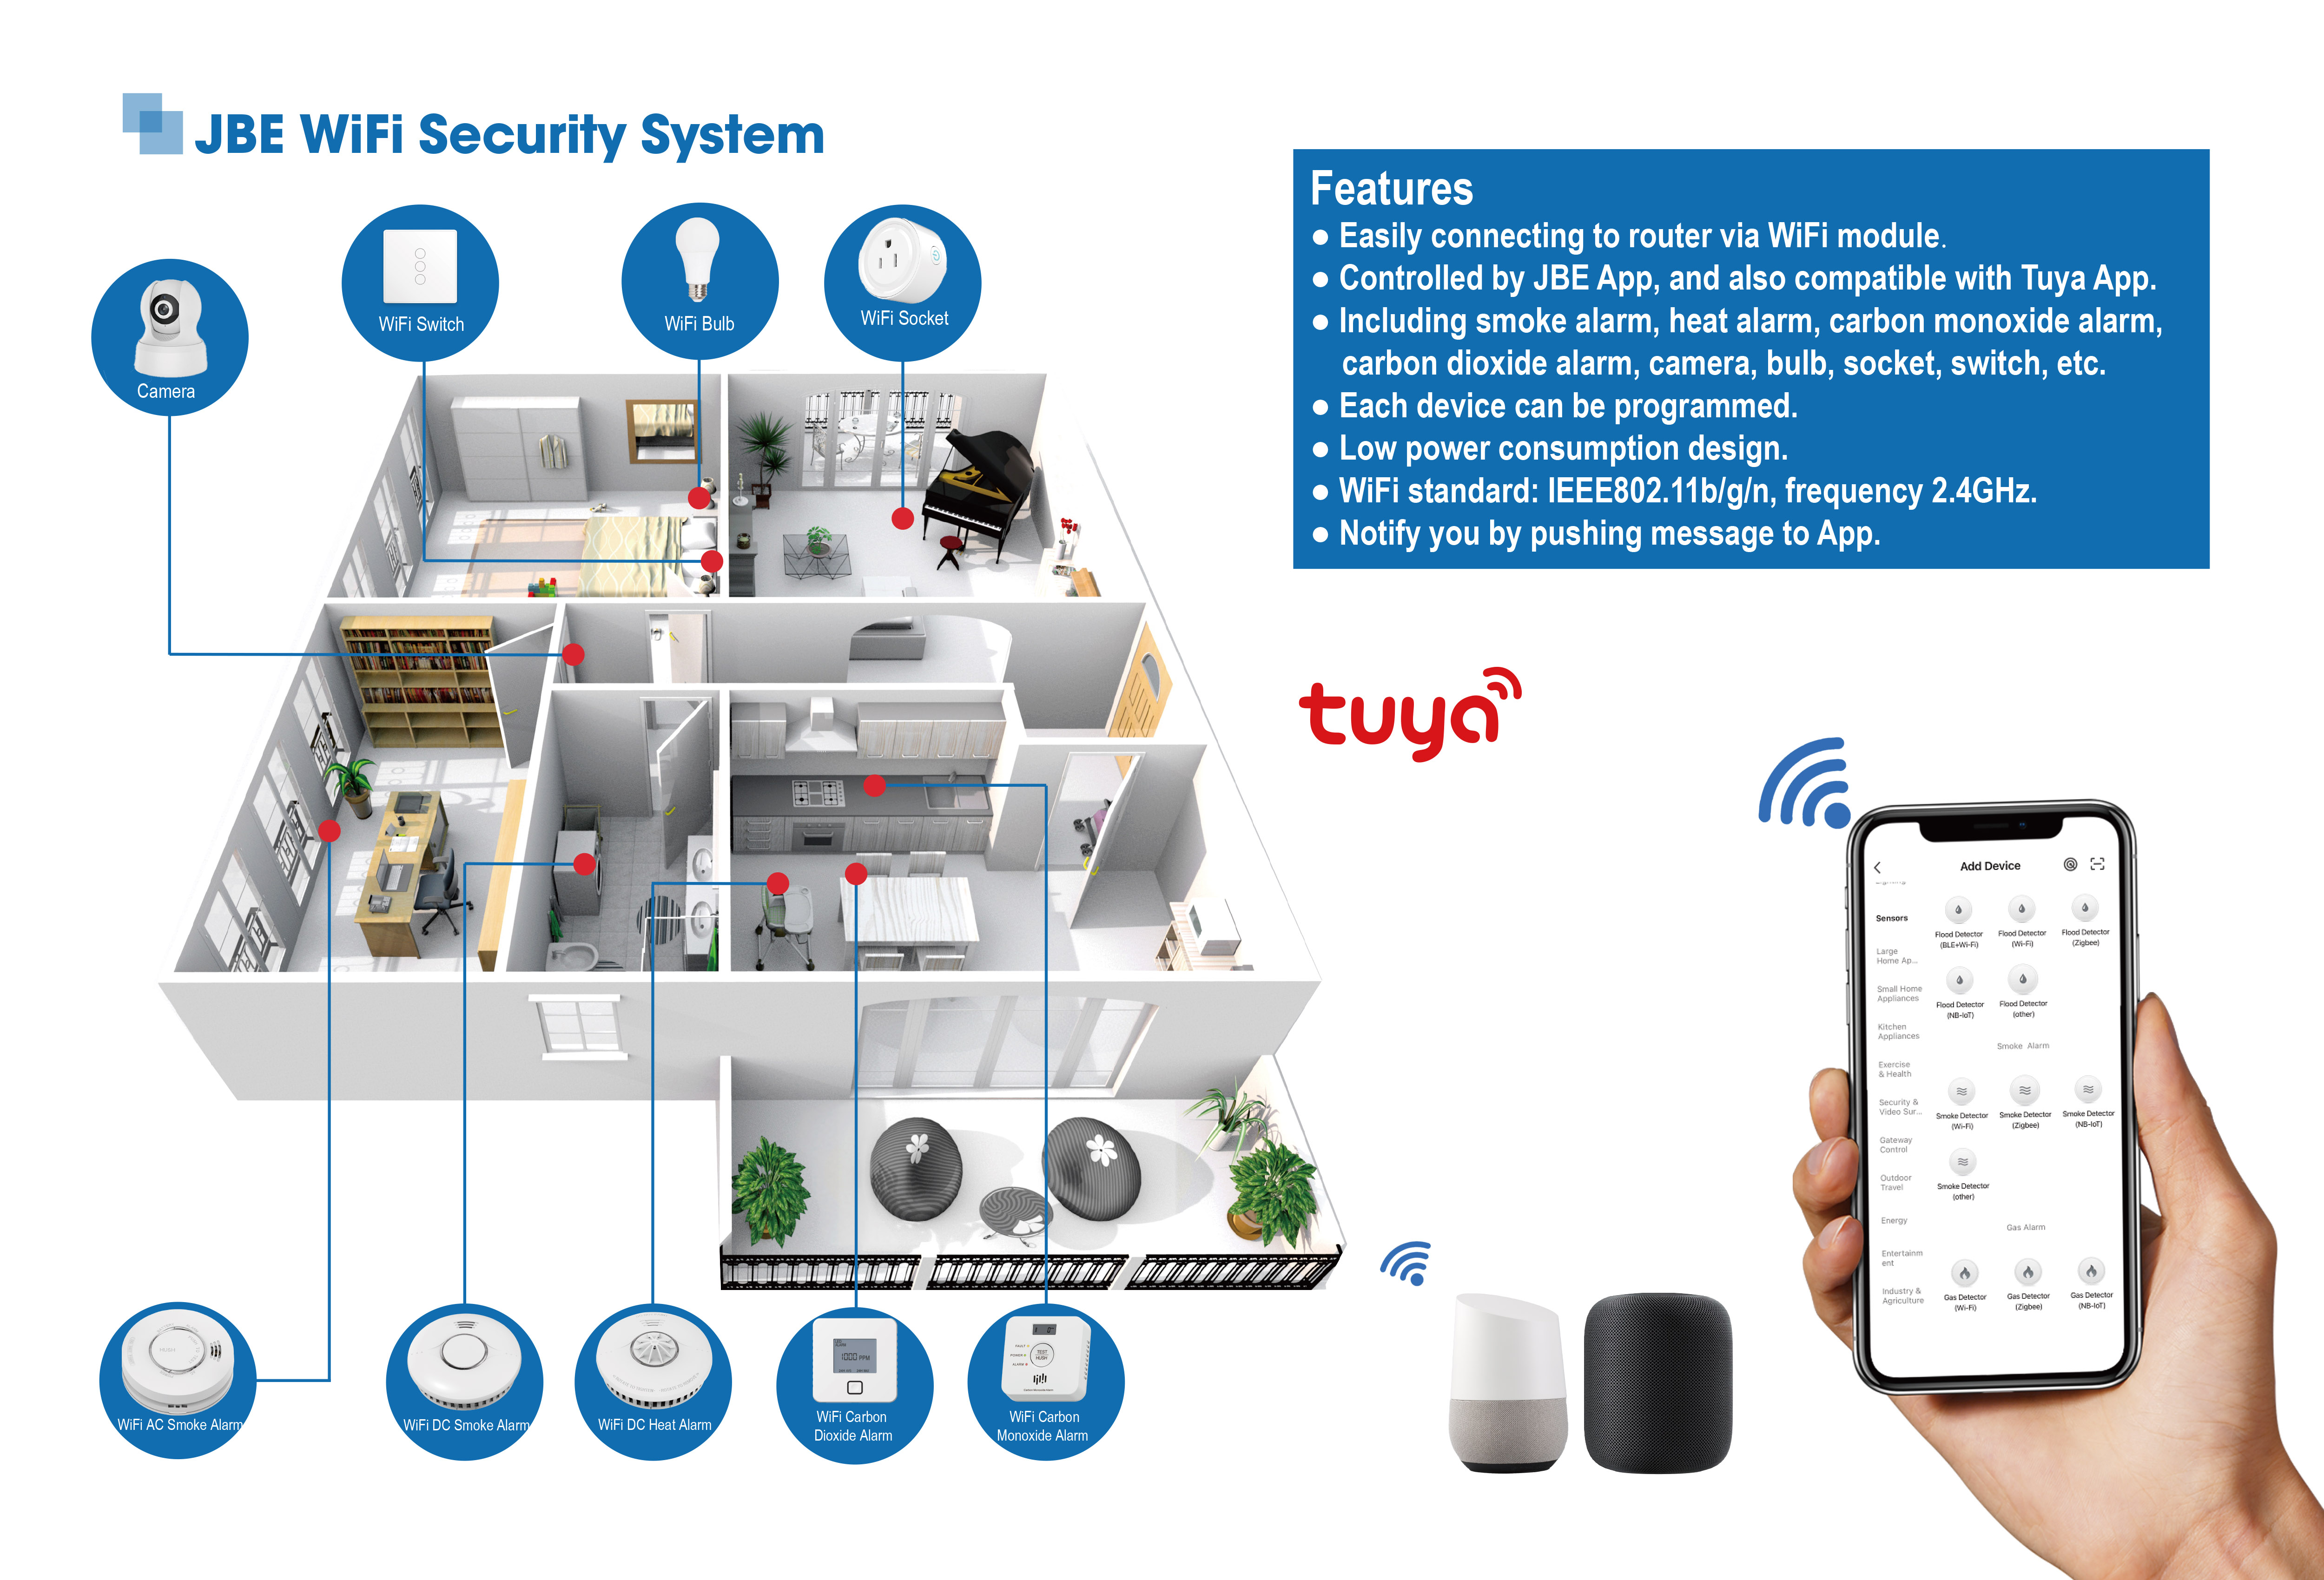 JBE WiFi Security System